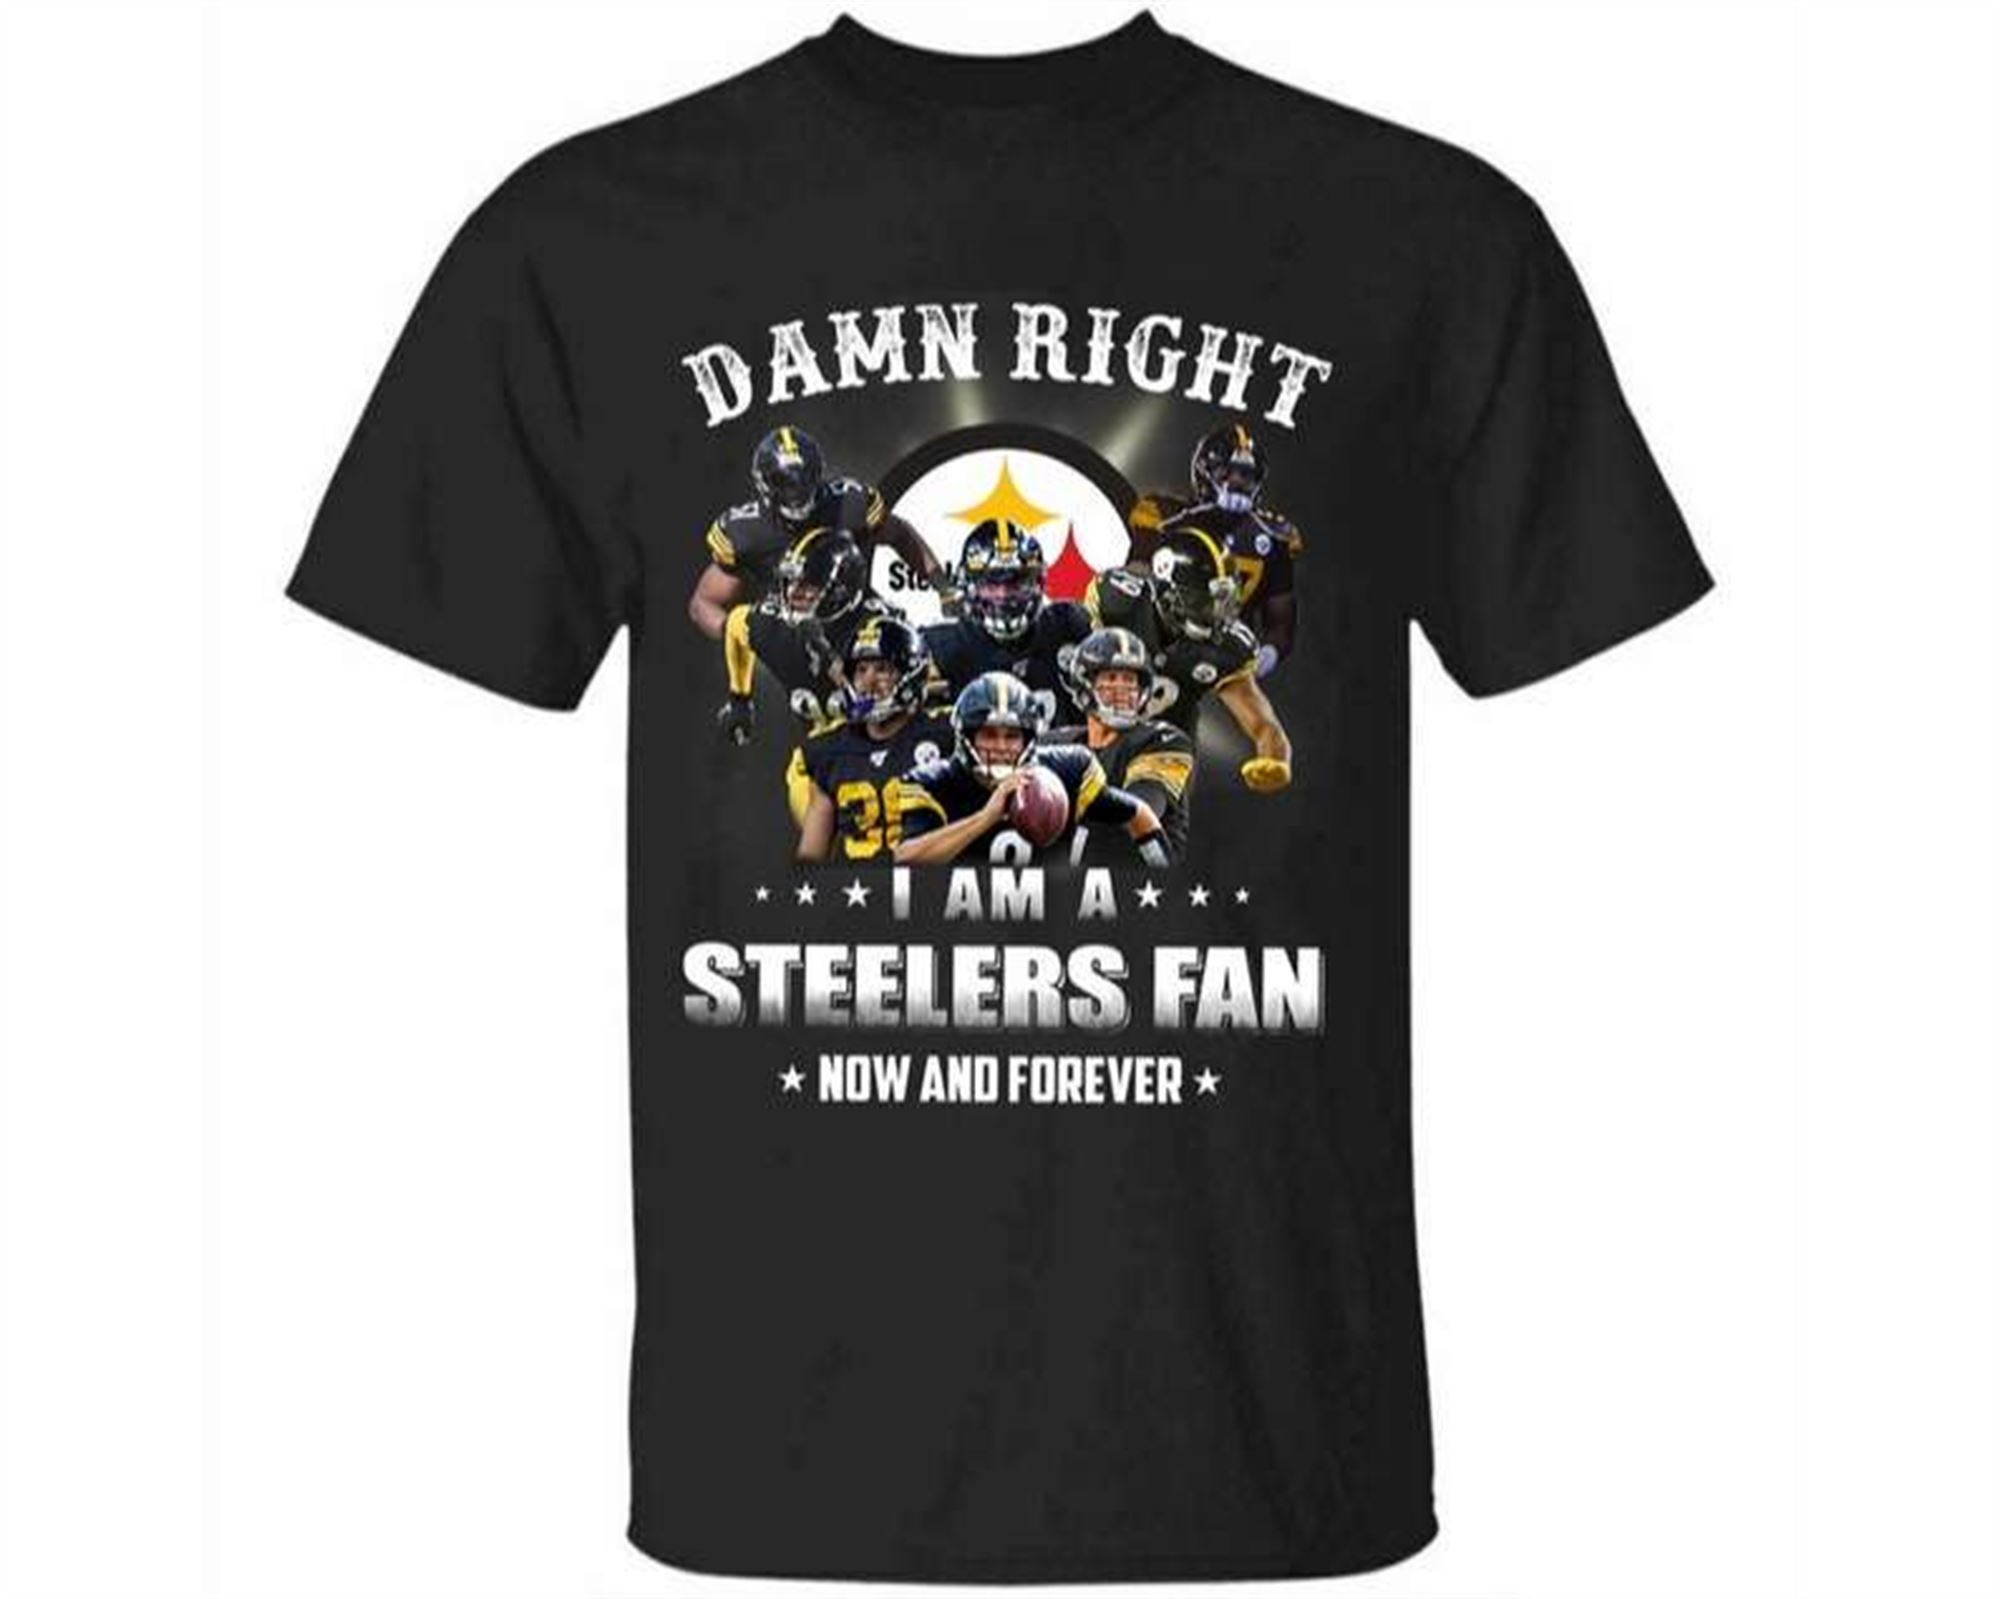 Damn Right I Am A Steelers Fan Now Forever T-shirt Full Size Up To 5xl